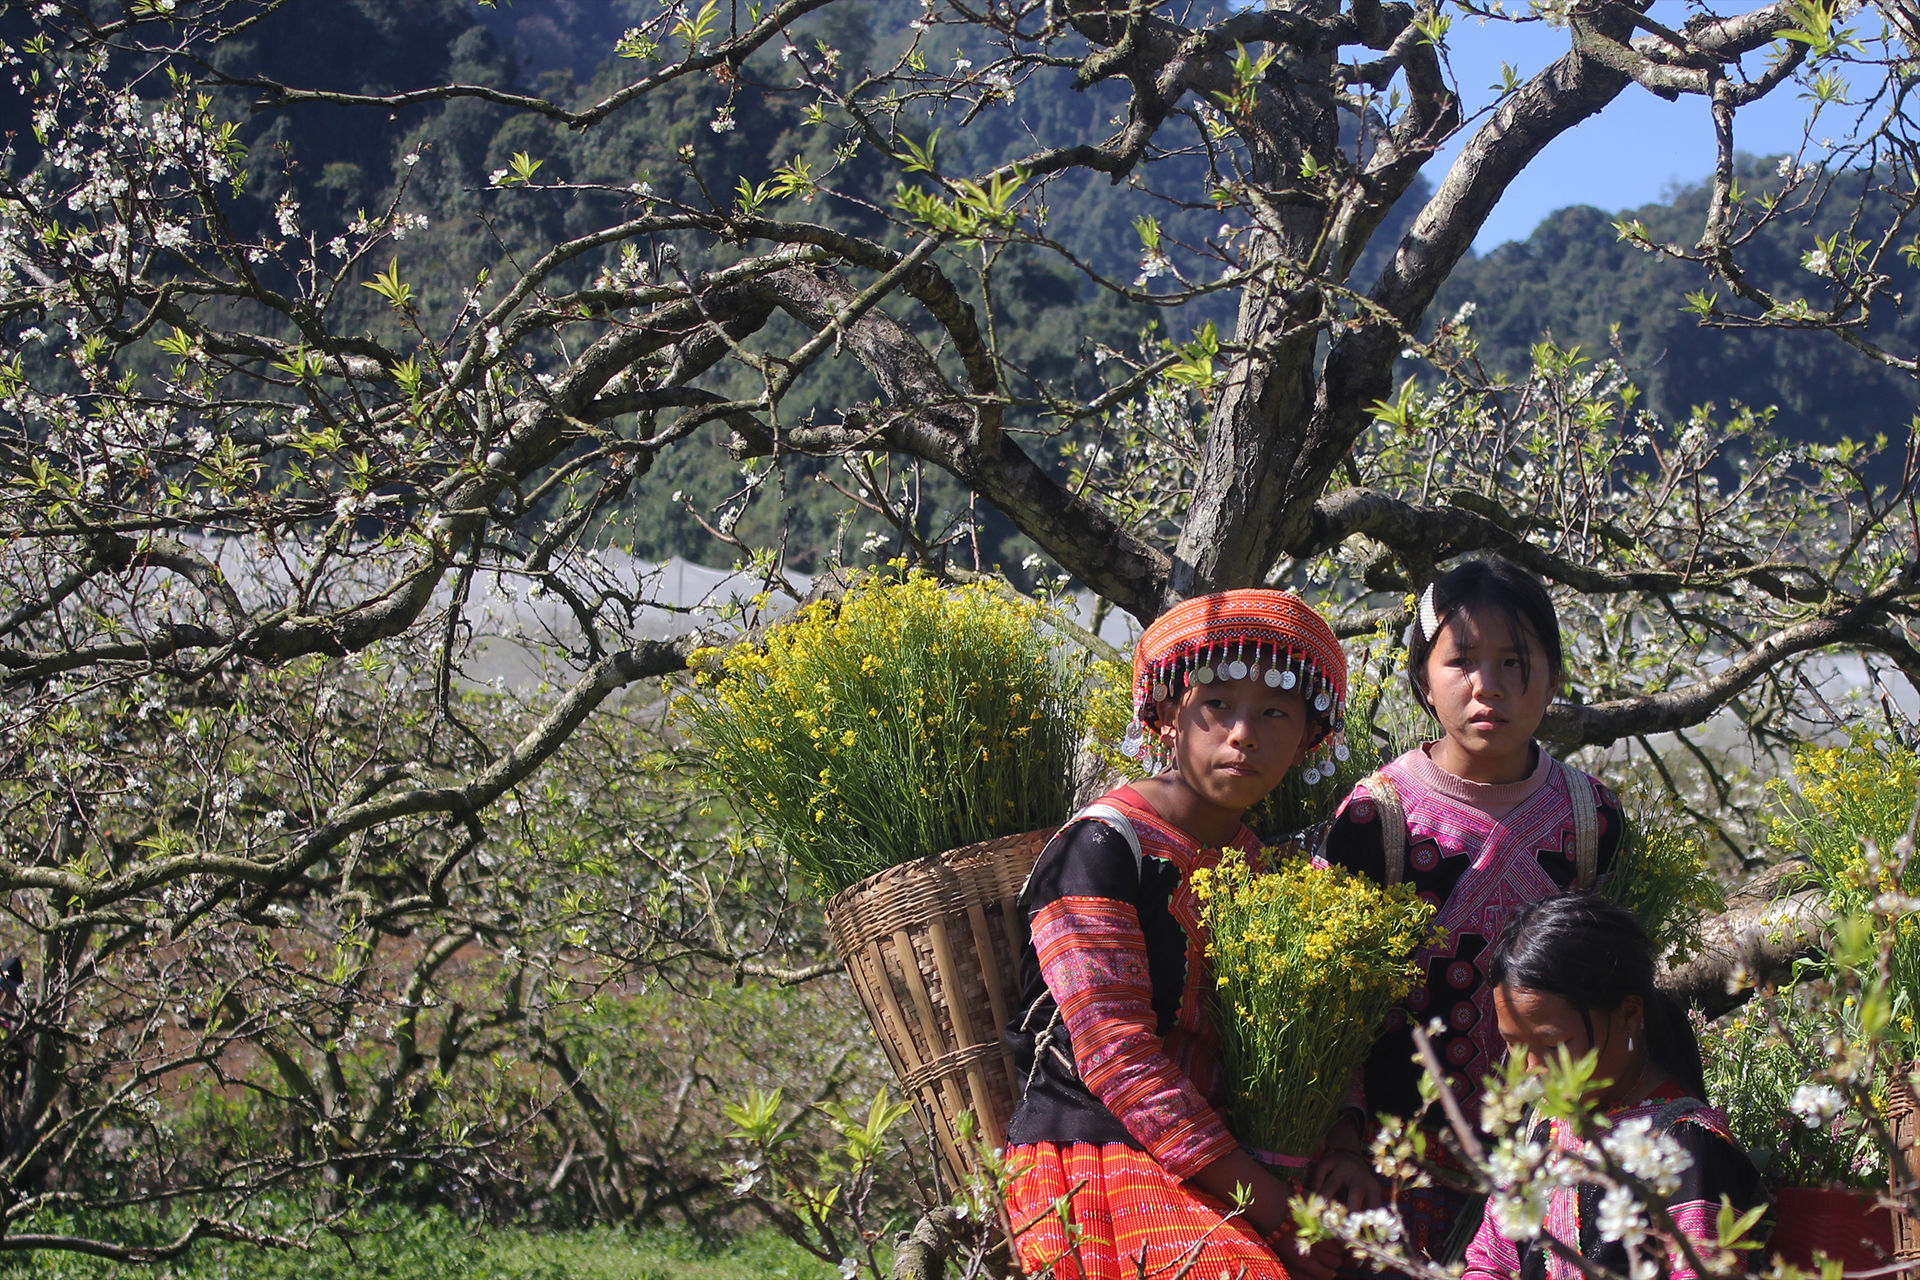 Recommended two-day itinerary to admire plum blossoms in Moc Chau